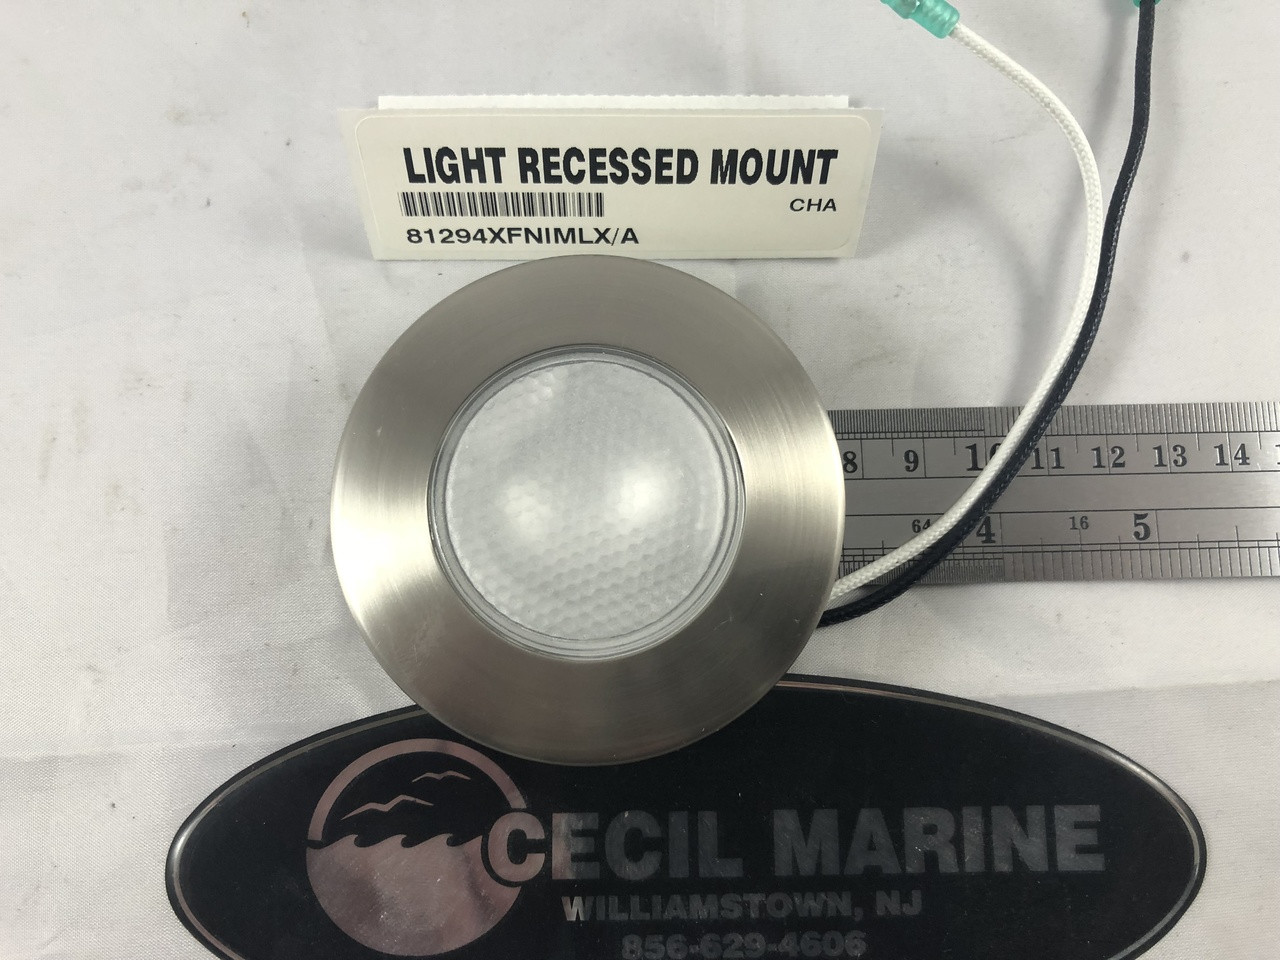 LIGHT RECESSED MOUNT OVERHEAD *Sorry this part is no longer available